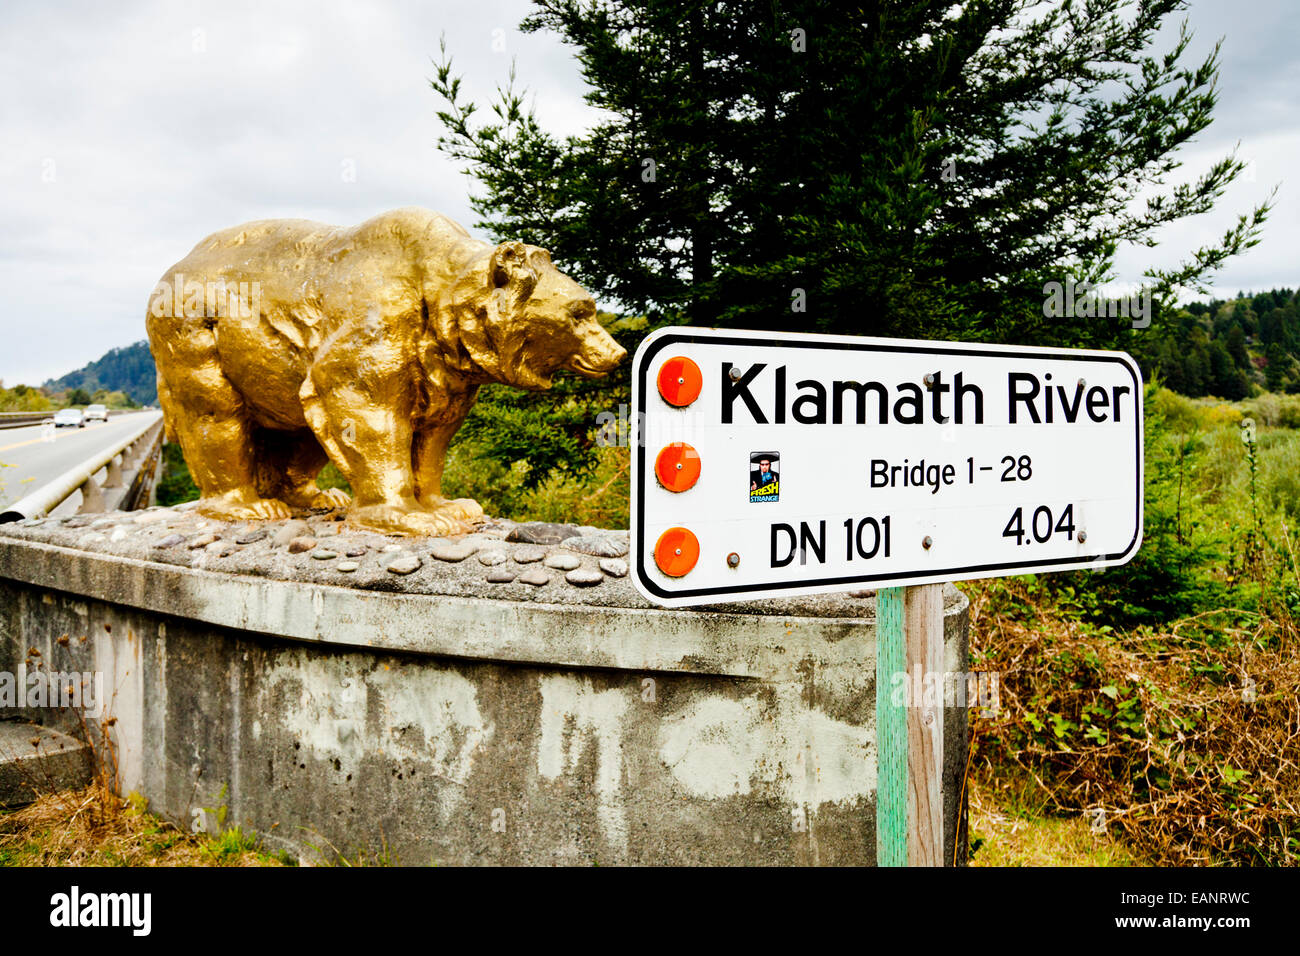 Sign and Golden bear on Bridge 1-28 carrying Highway 101 over the Klamath River, Stock Photo